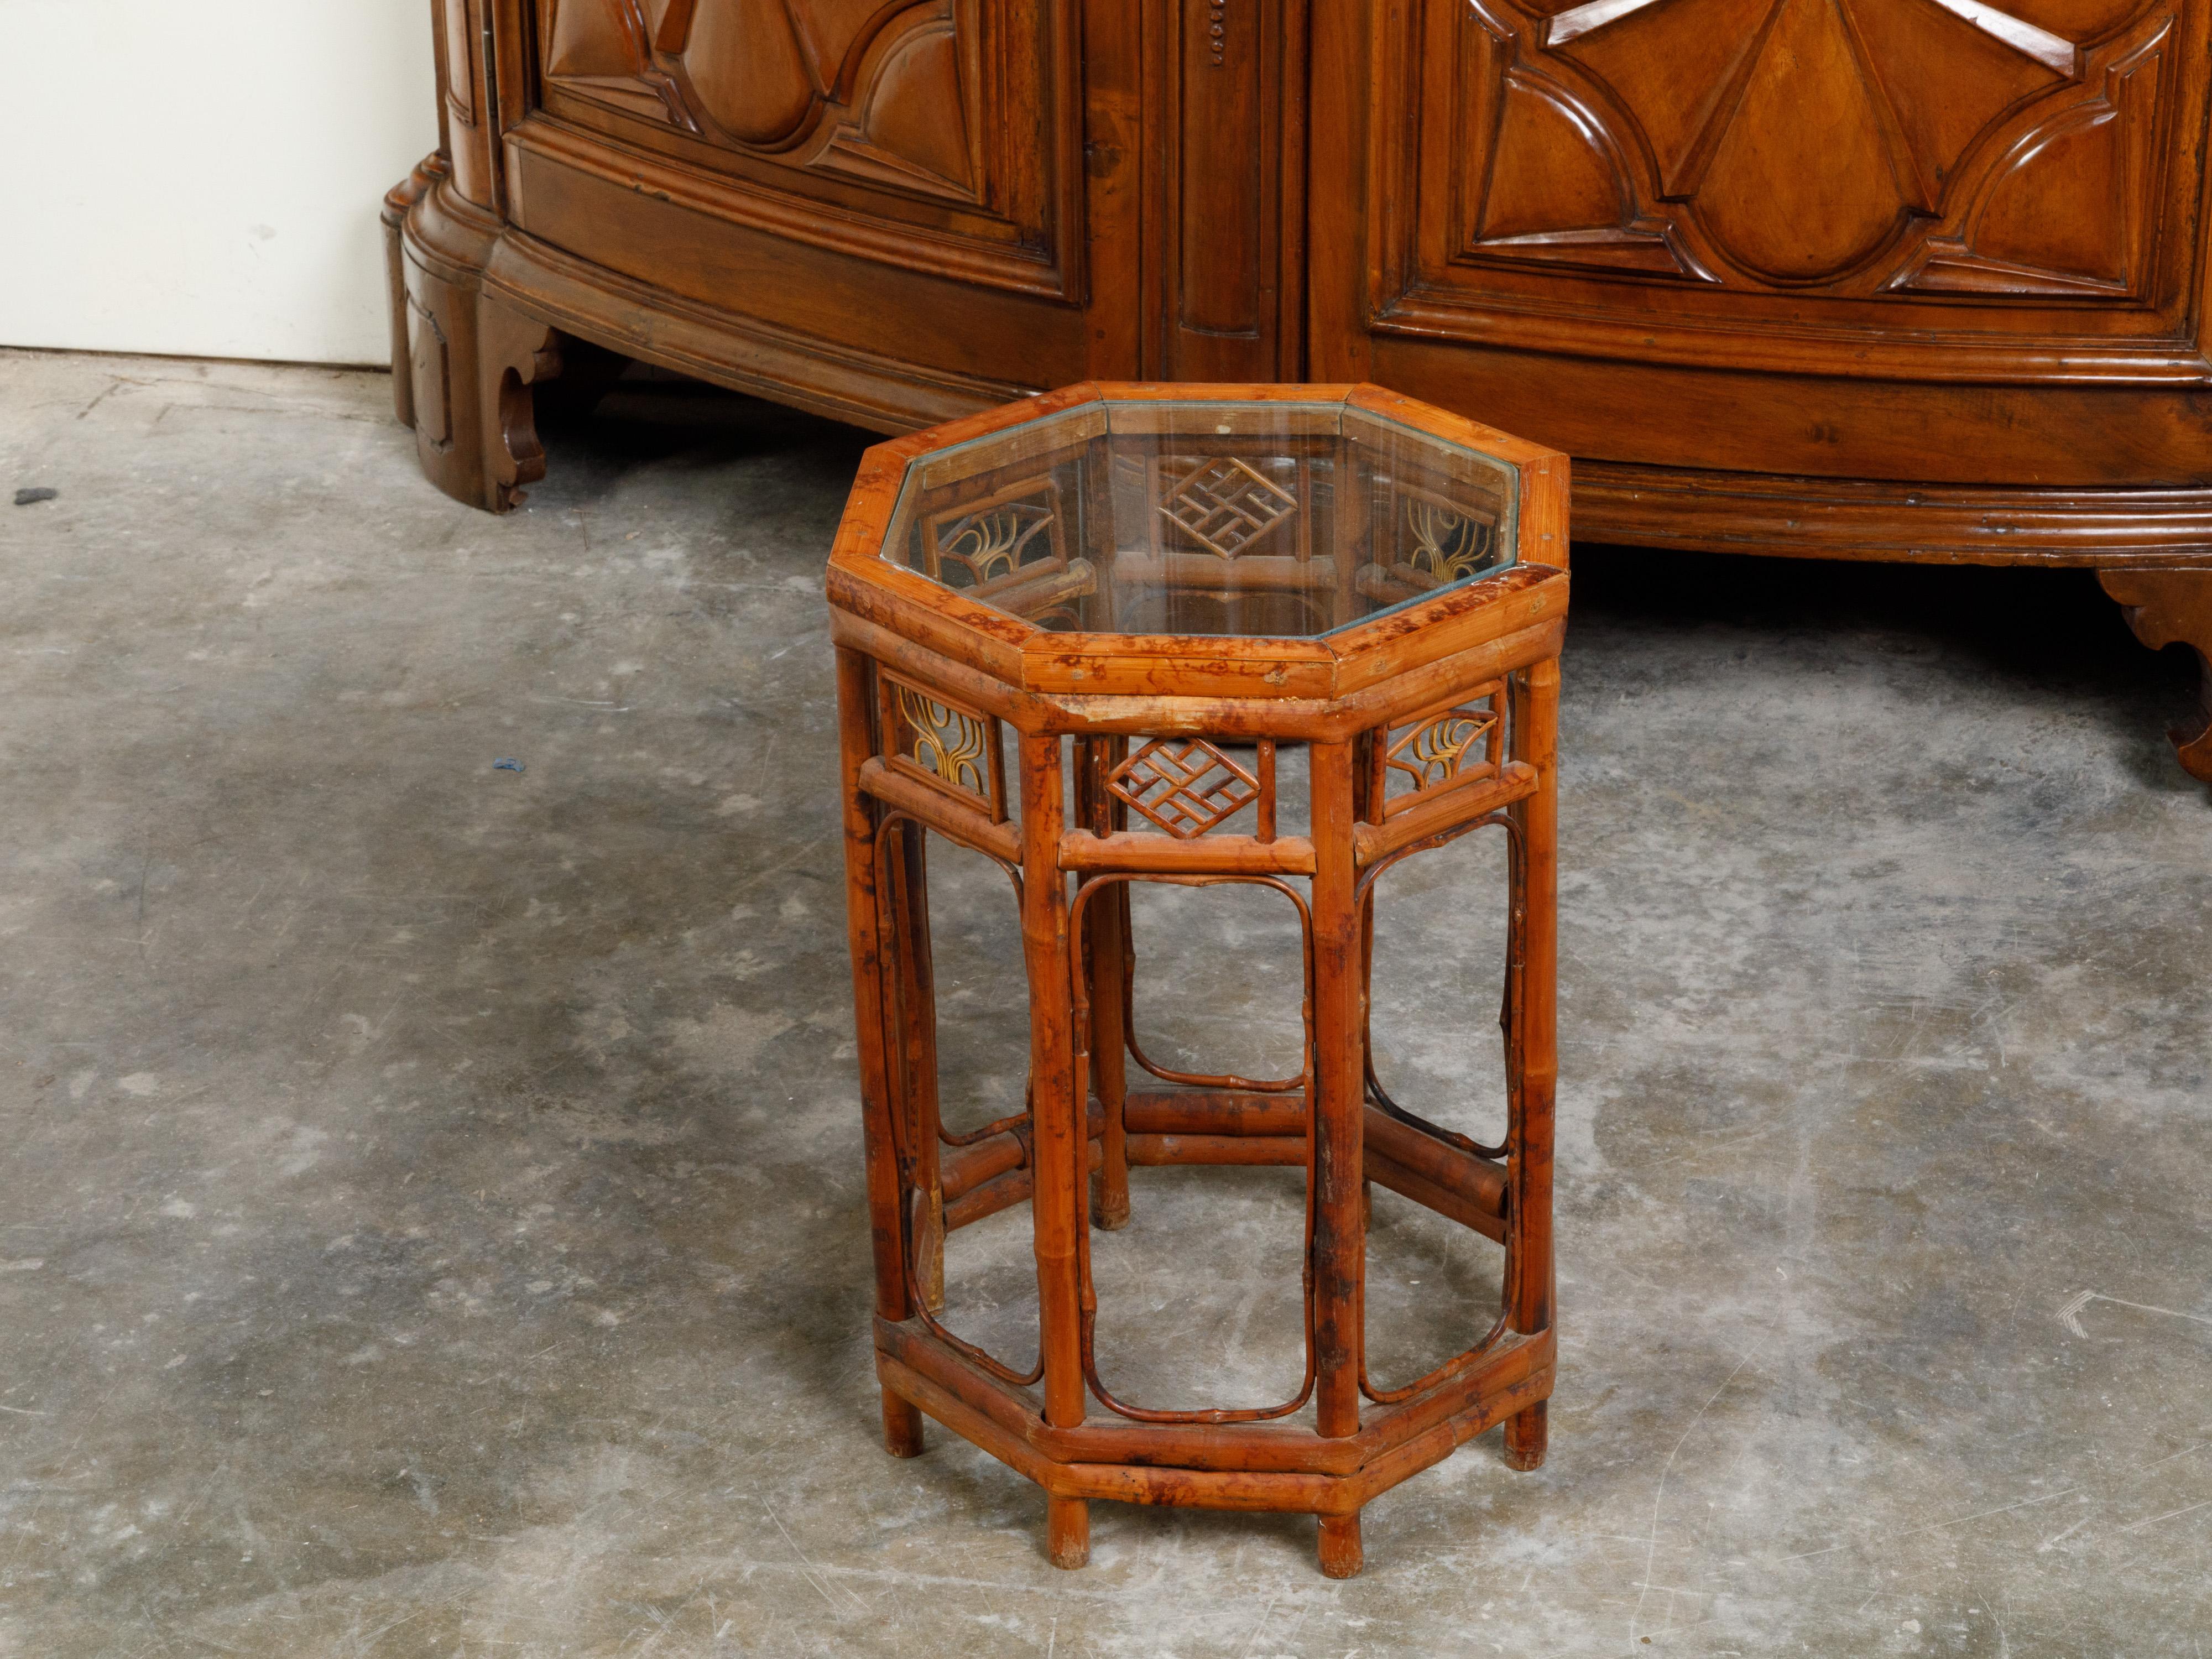 Midcentury Octagonal Bamboo Side Table with Glass Top and Geometric Motifs For Sale 1